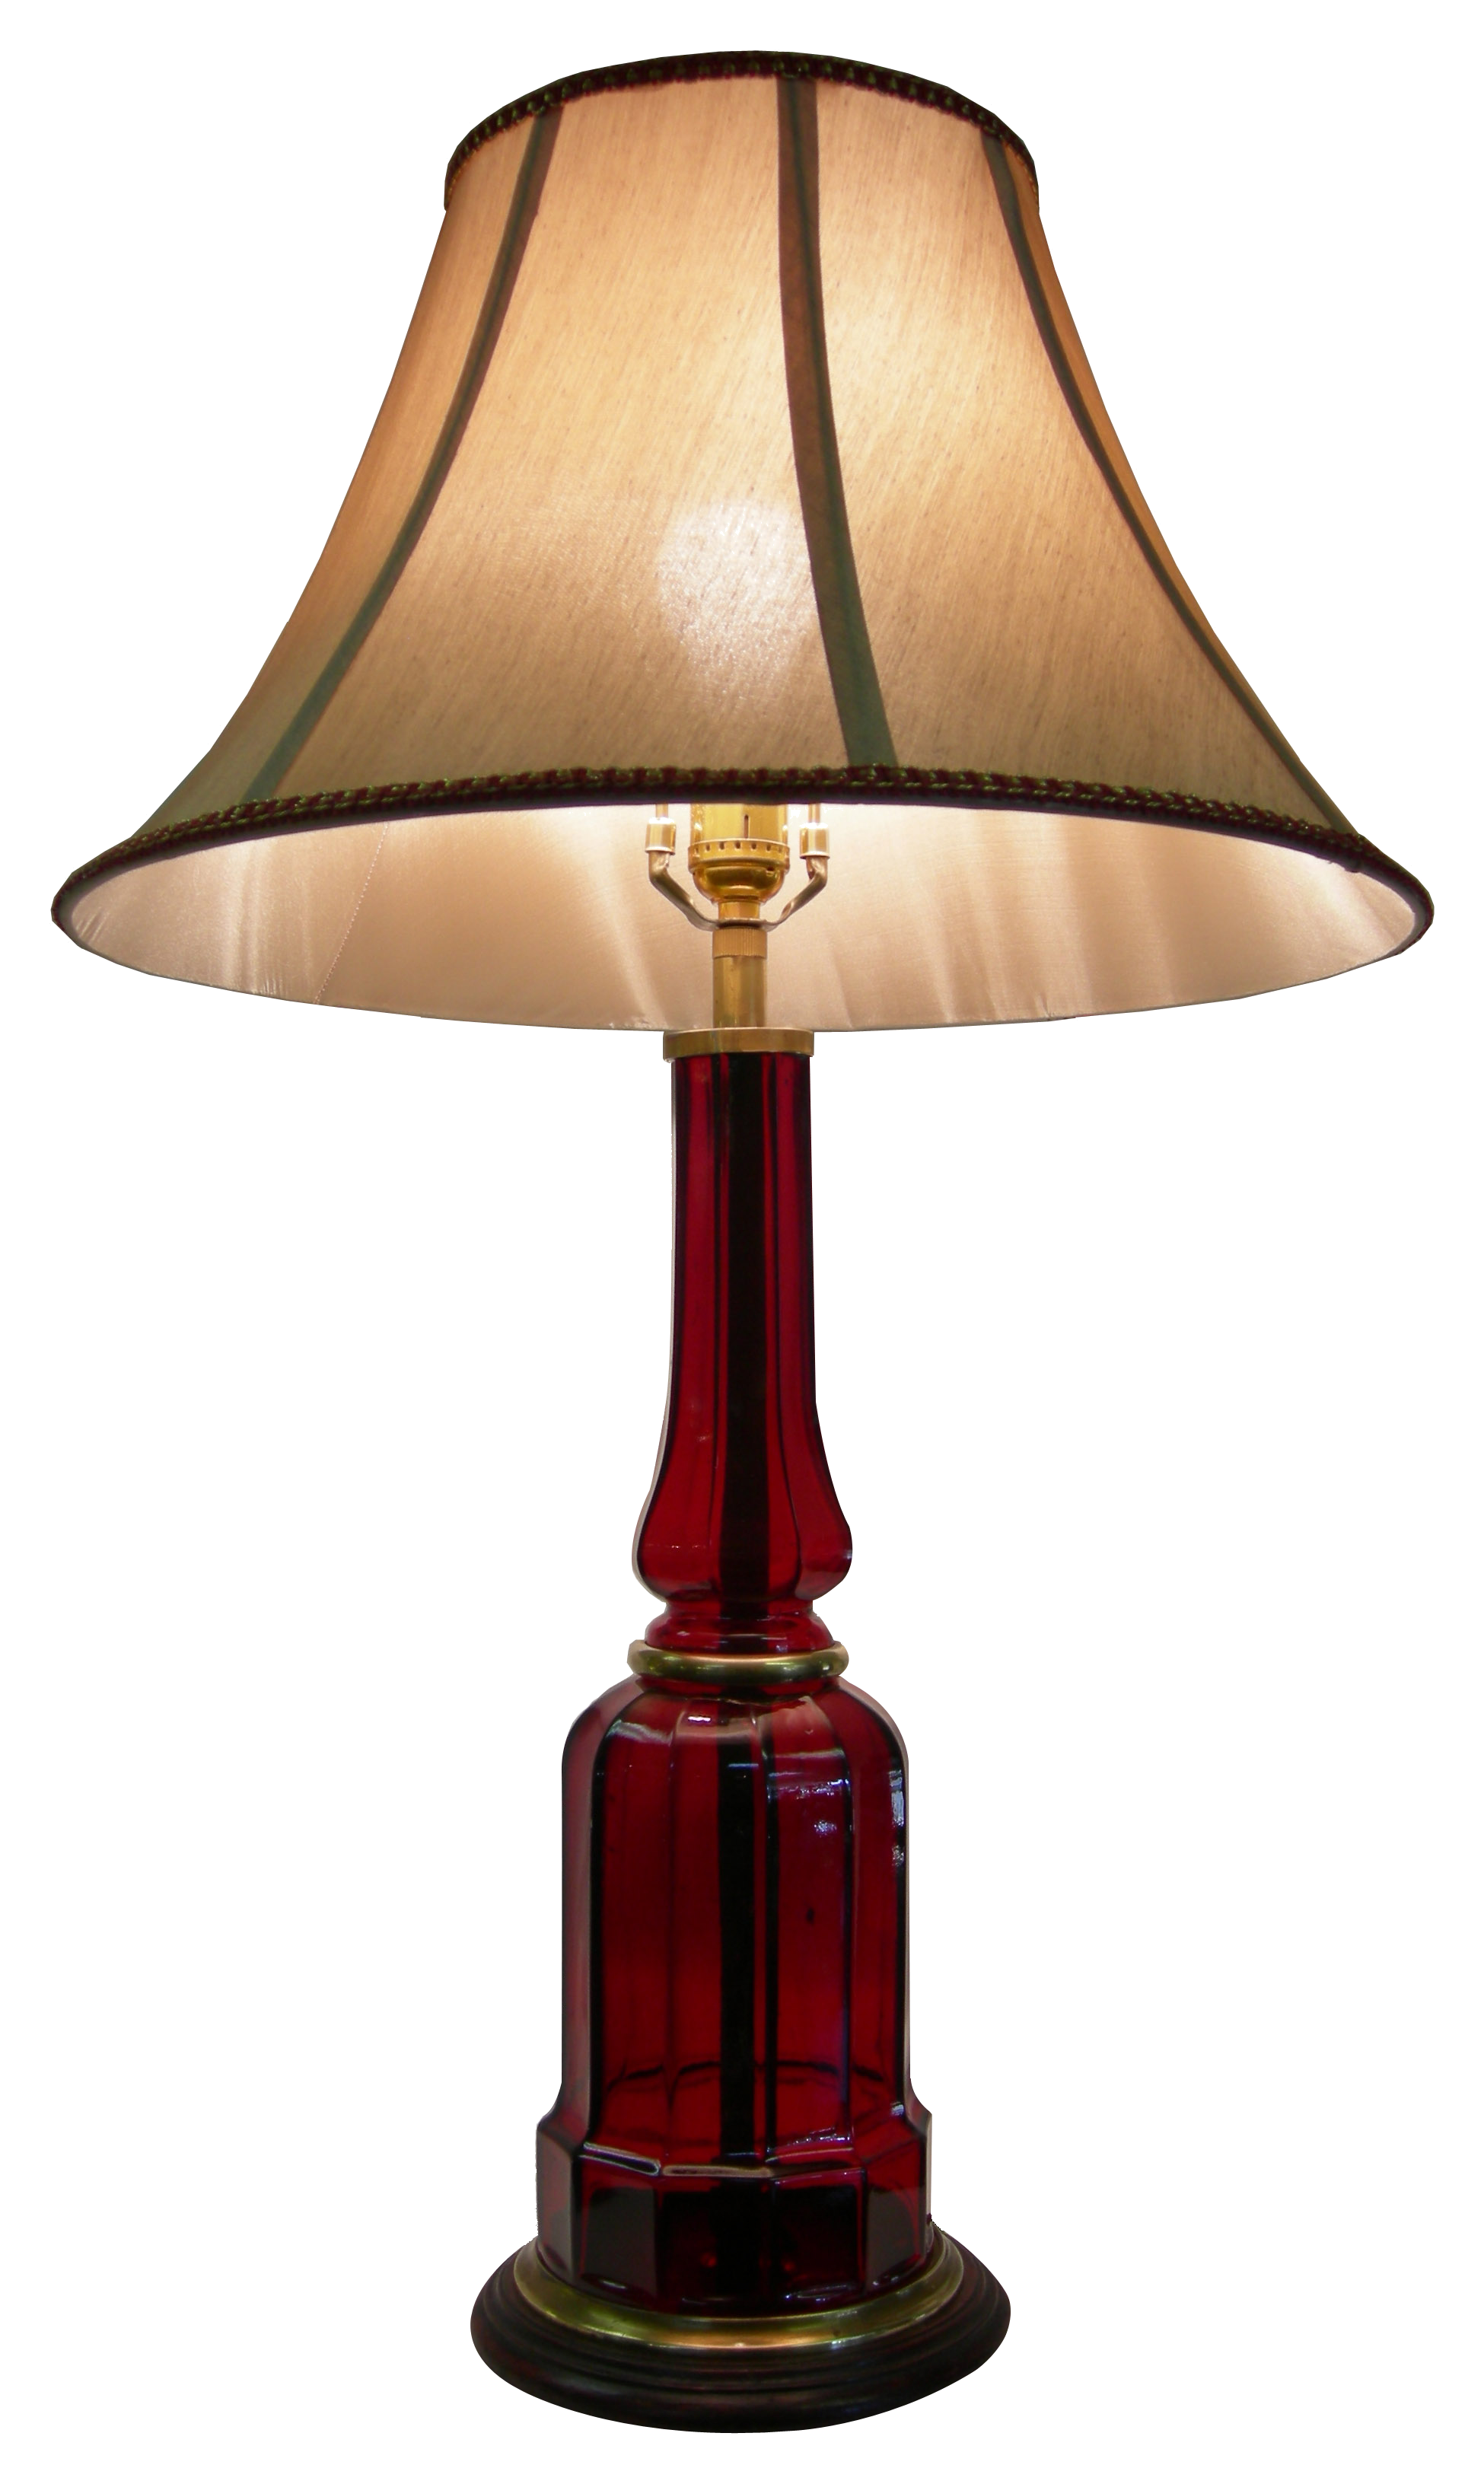 Electric lamp PNG image